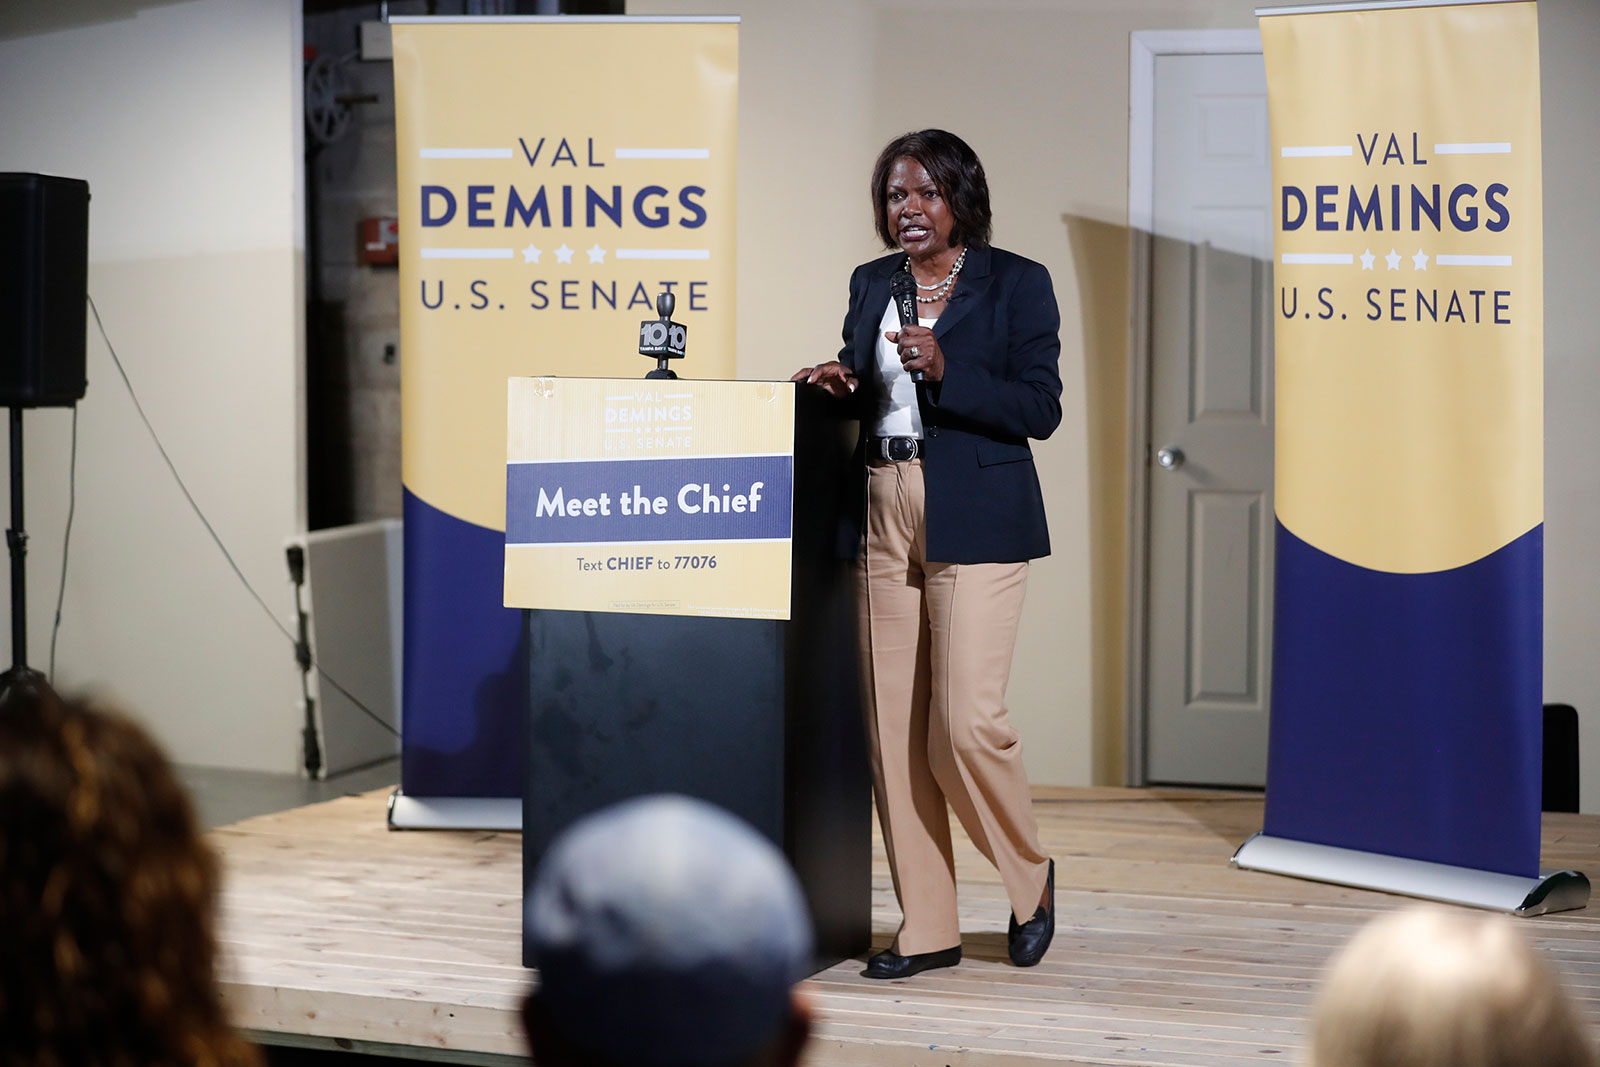 Rep. Val Demings delivers a campaign speech at an event in St. Petersburg, Florida, in June.